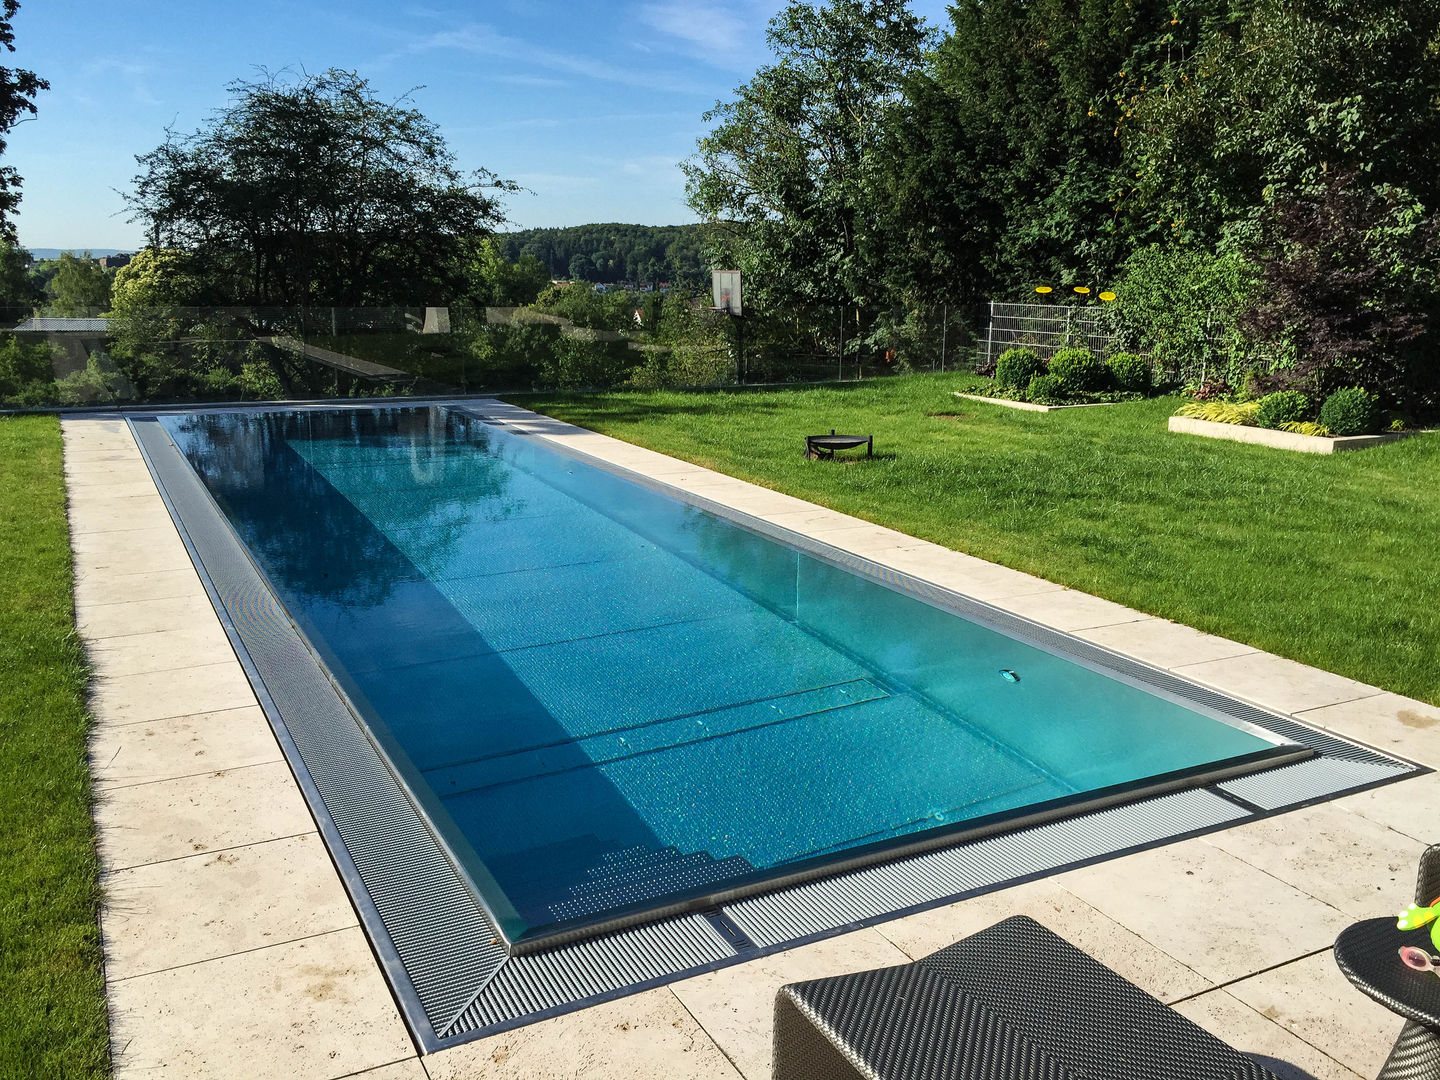 Classic Modular Stainless Steel Pool homify Pool